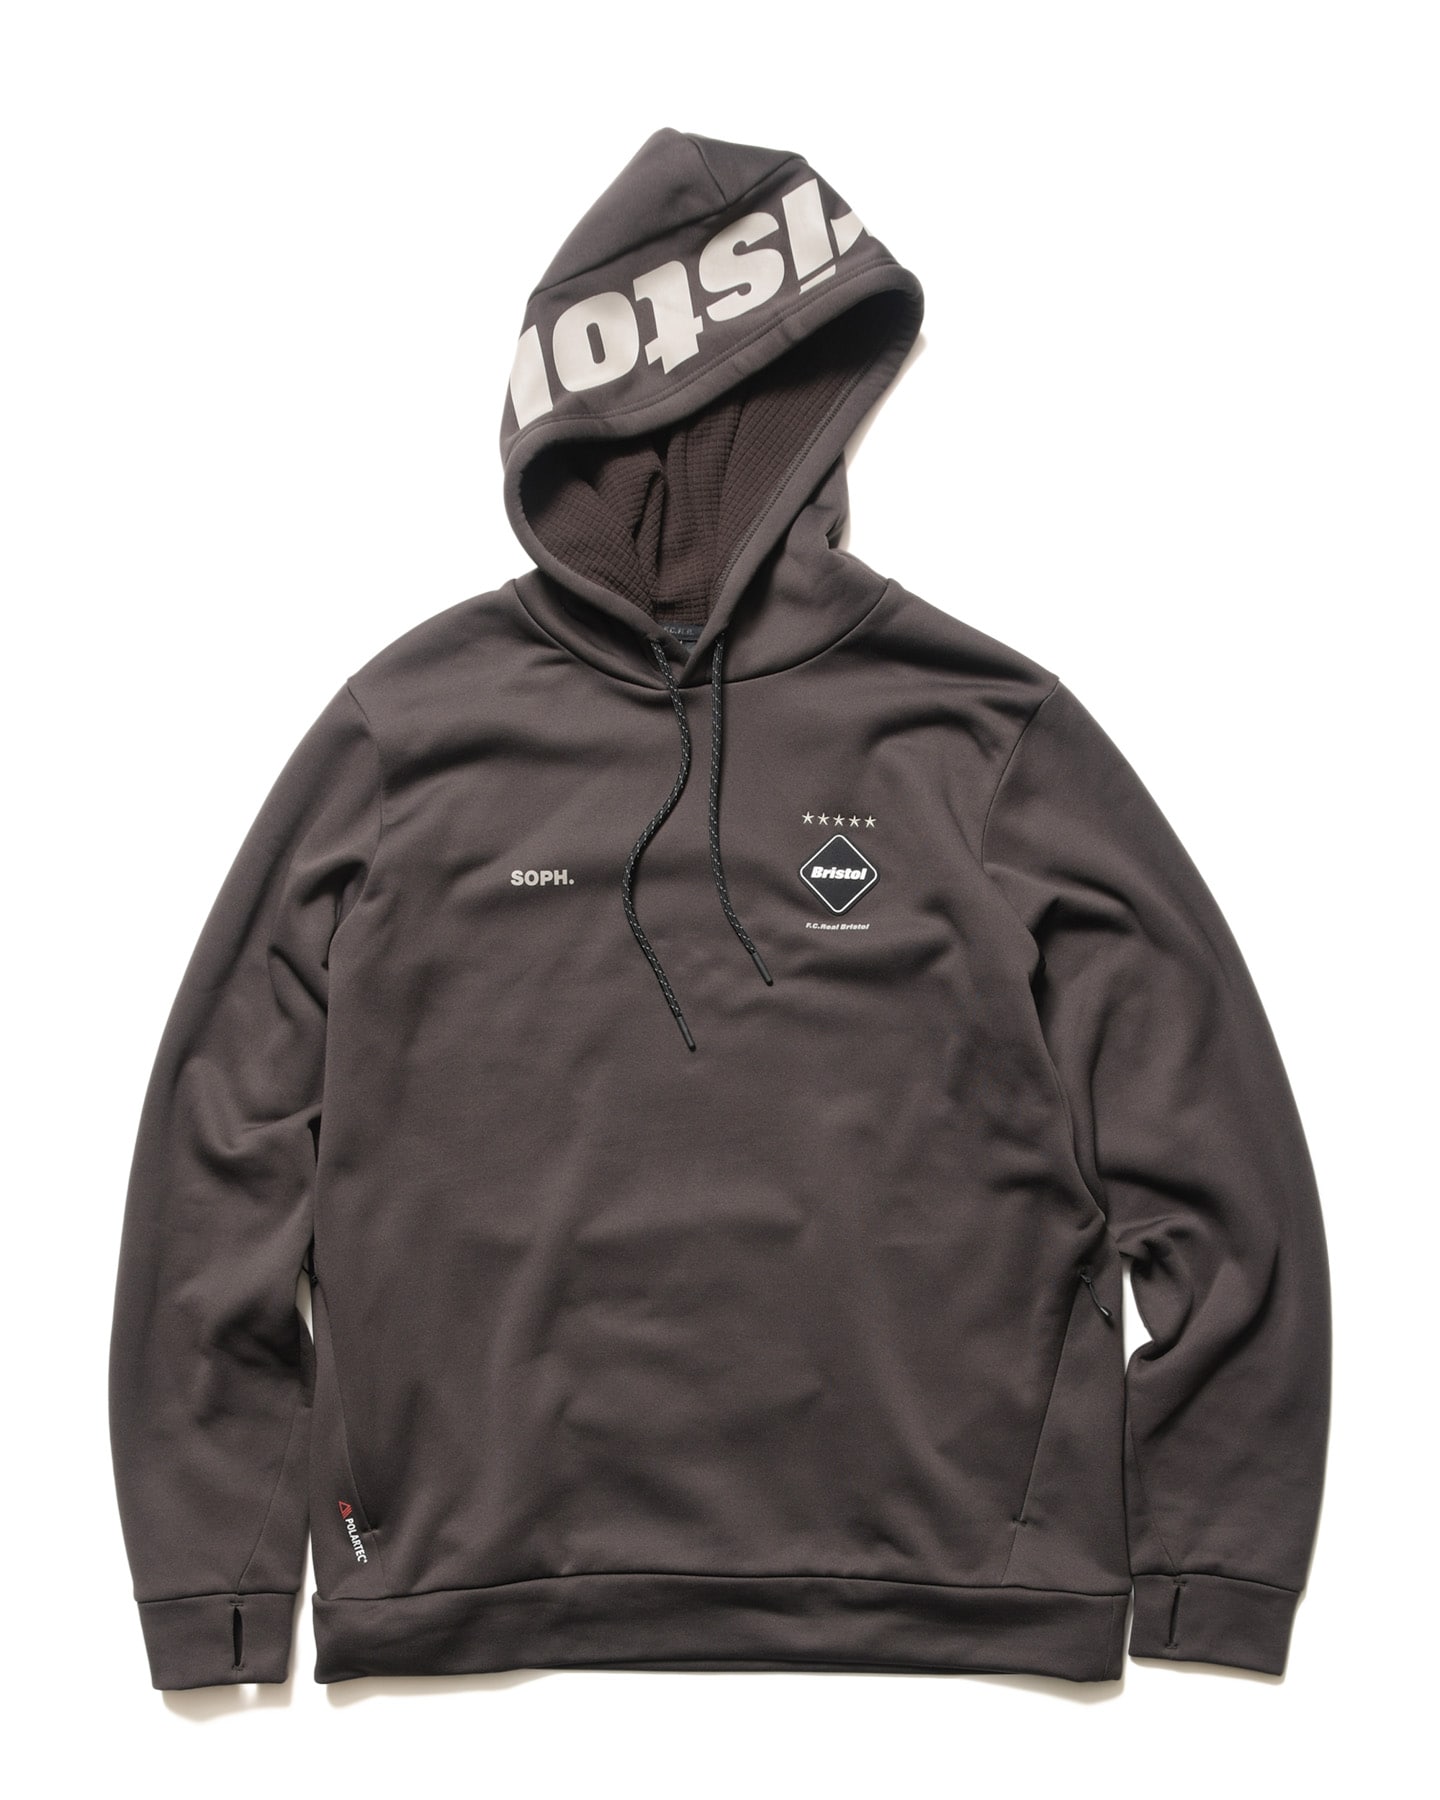 Immersion Research Polartec Thermal Pro Hot Lap Hoodie